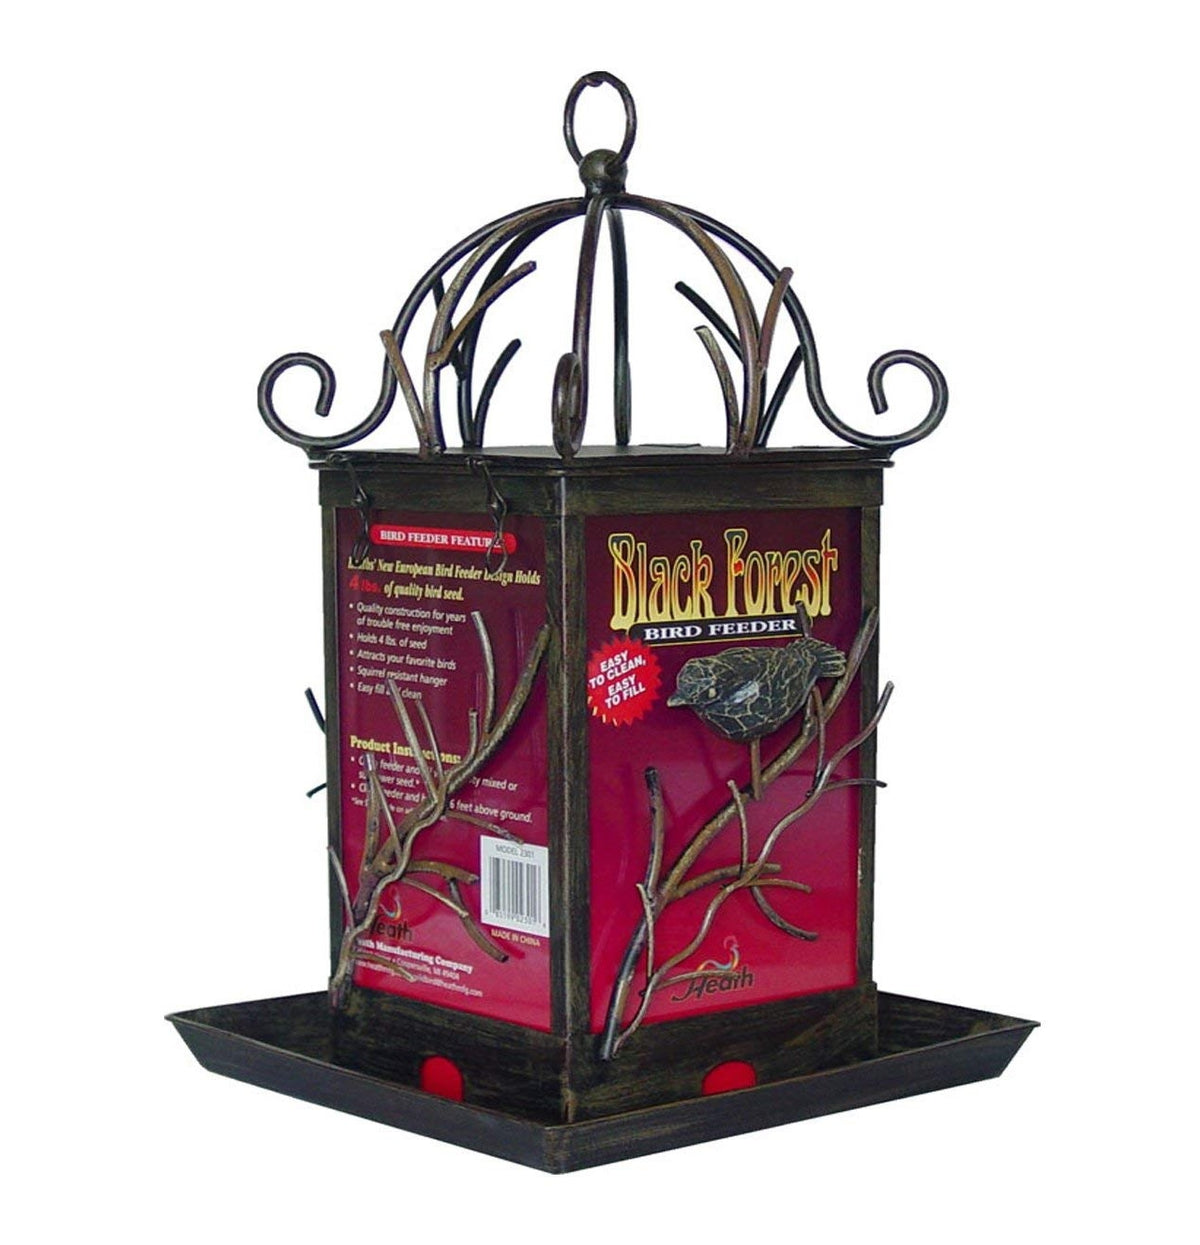 Heath 2301 Black Forest Bird Feeder Holds 4Lbs Of Mixed Seed